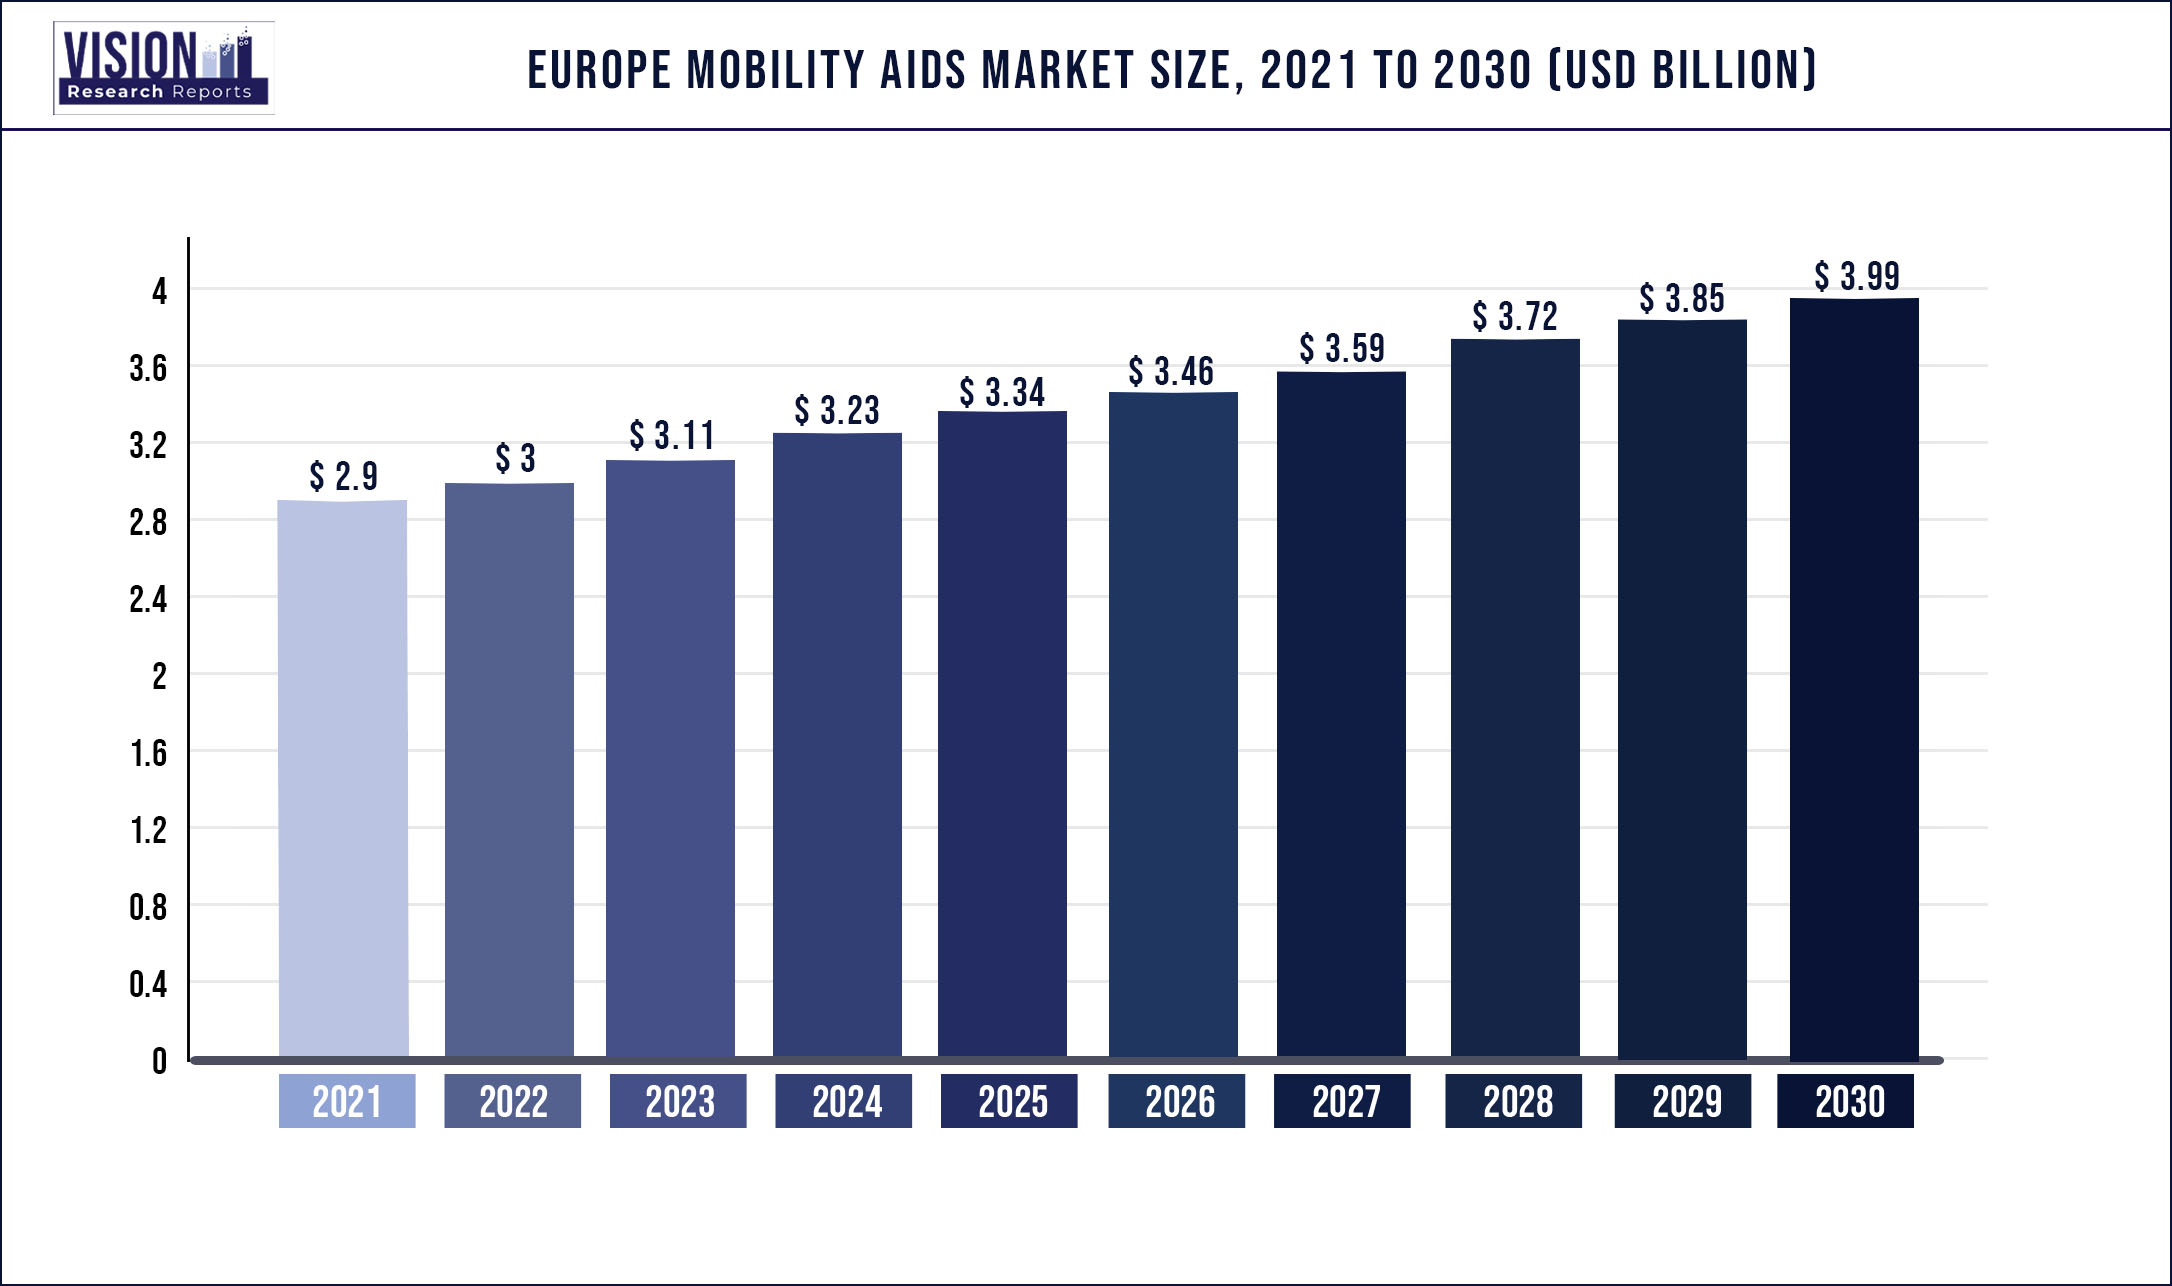 Europe Mobility Aids Market Size 2021 to 2030